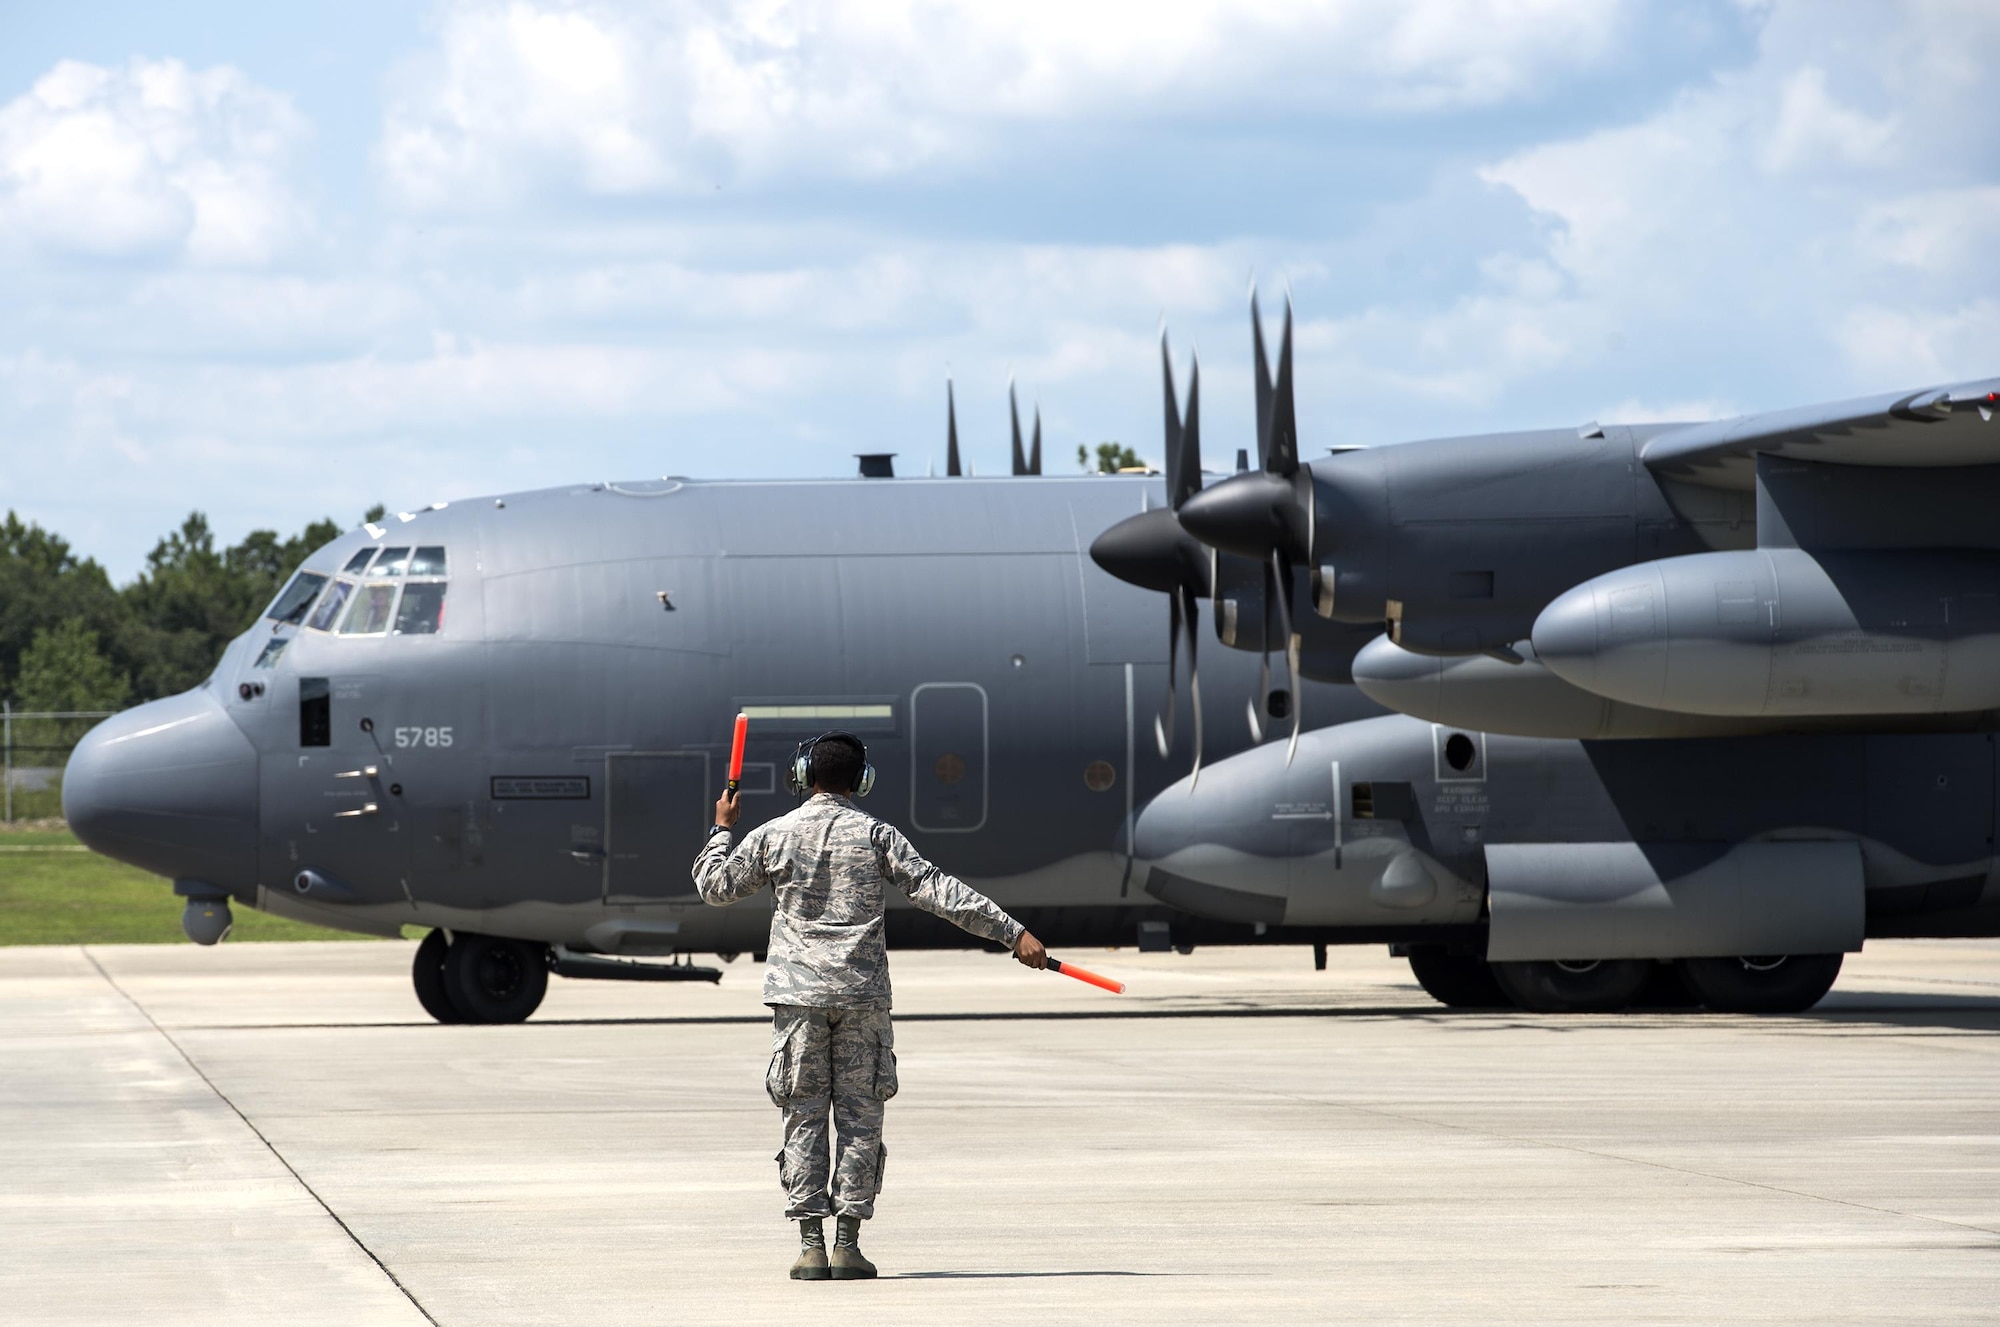 U.S. Air Force Capt. Christy Wise, 71st Rescue Squadron HC-130J Combat King II pilot, taxis at the end of her requalification flight, July 22, 2016, at Moody Air Force Base, Ga. Wise made her mark in Air Force history by becoming the first female above-the-knee amputee to return to the skies. (U.S. Air Force photo by Airman 1st Class Janiqua P. Robinson)